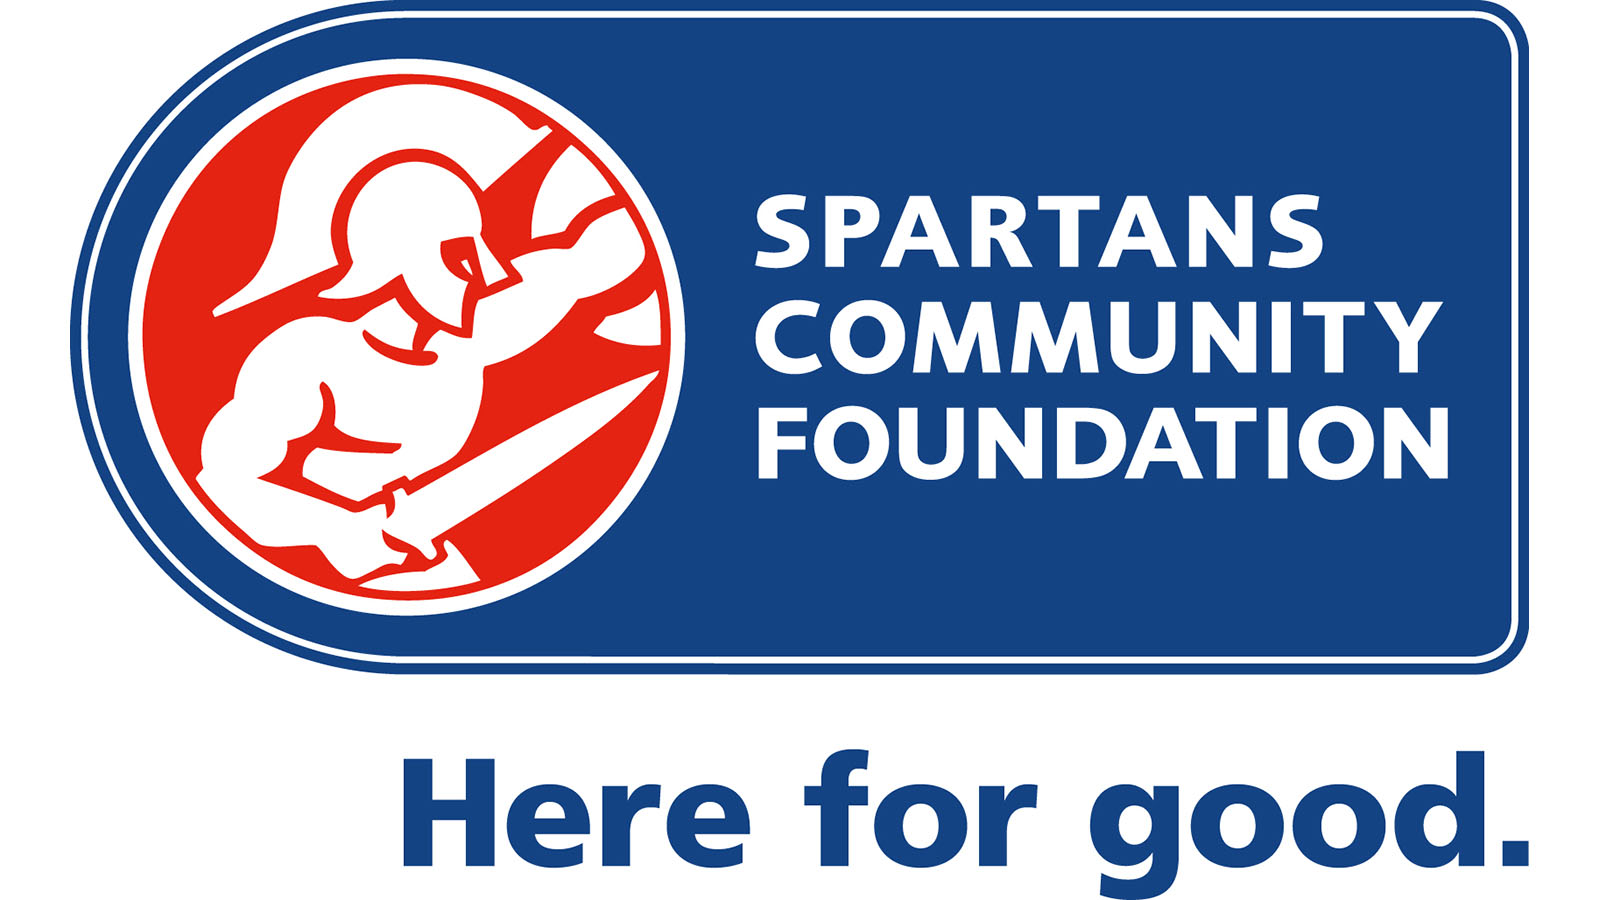 Spartans Community Foundation raising funds for Youth Work